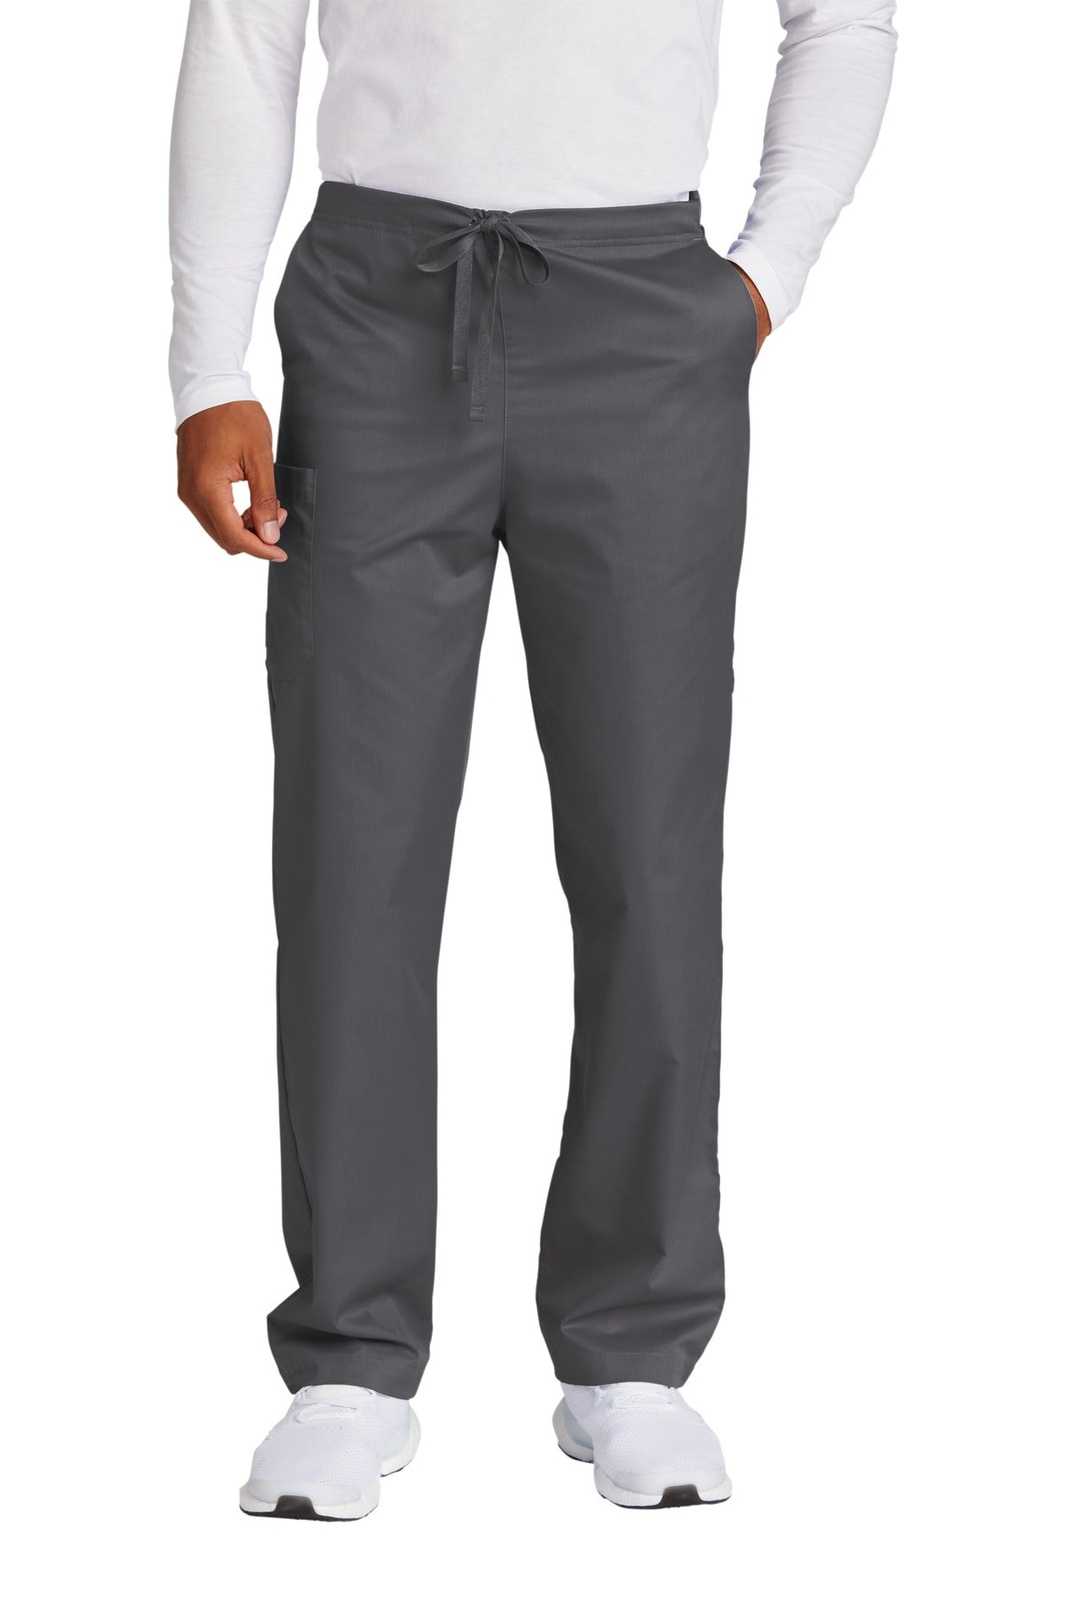 Wonderwink WW3150T Unisex Tall WorkFlexCargo Pant - Pewter - HIT a Double - 1